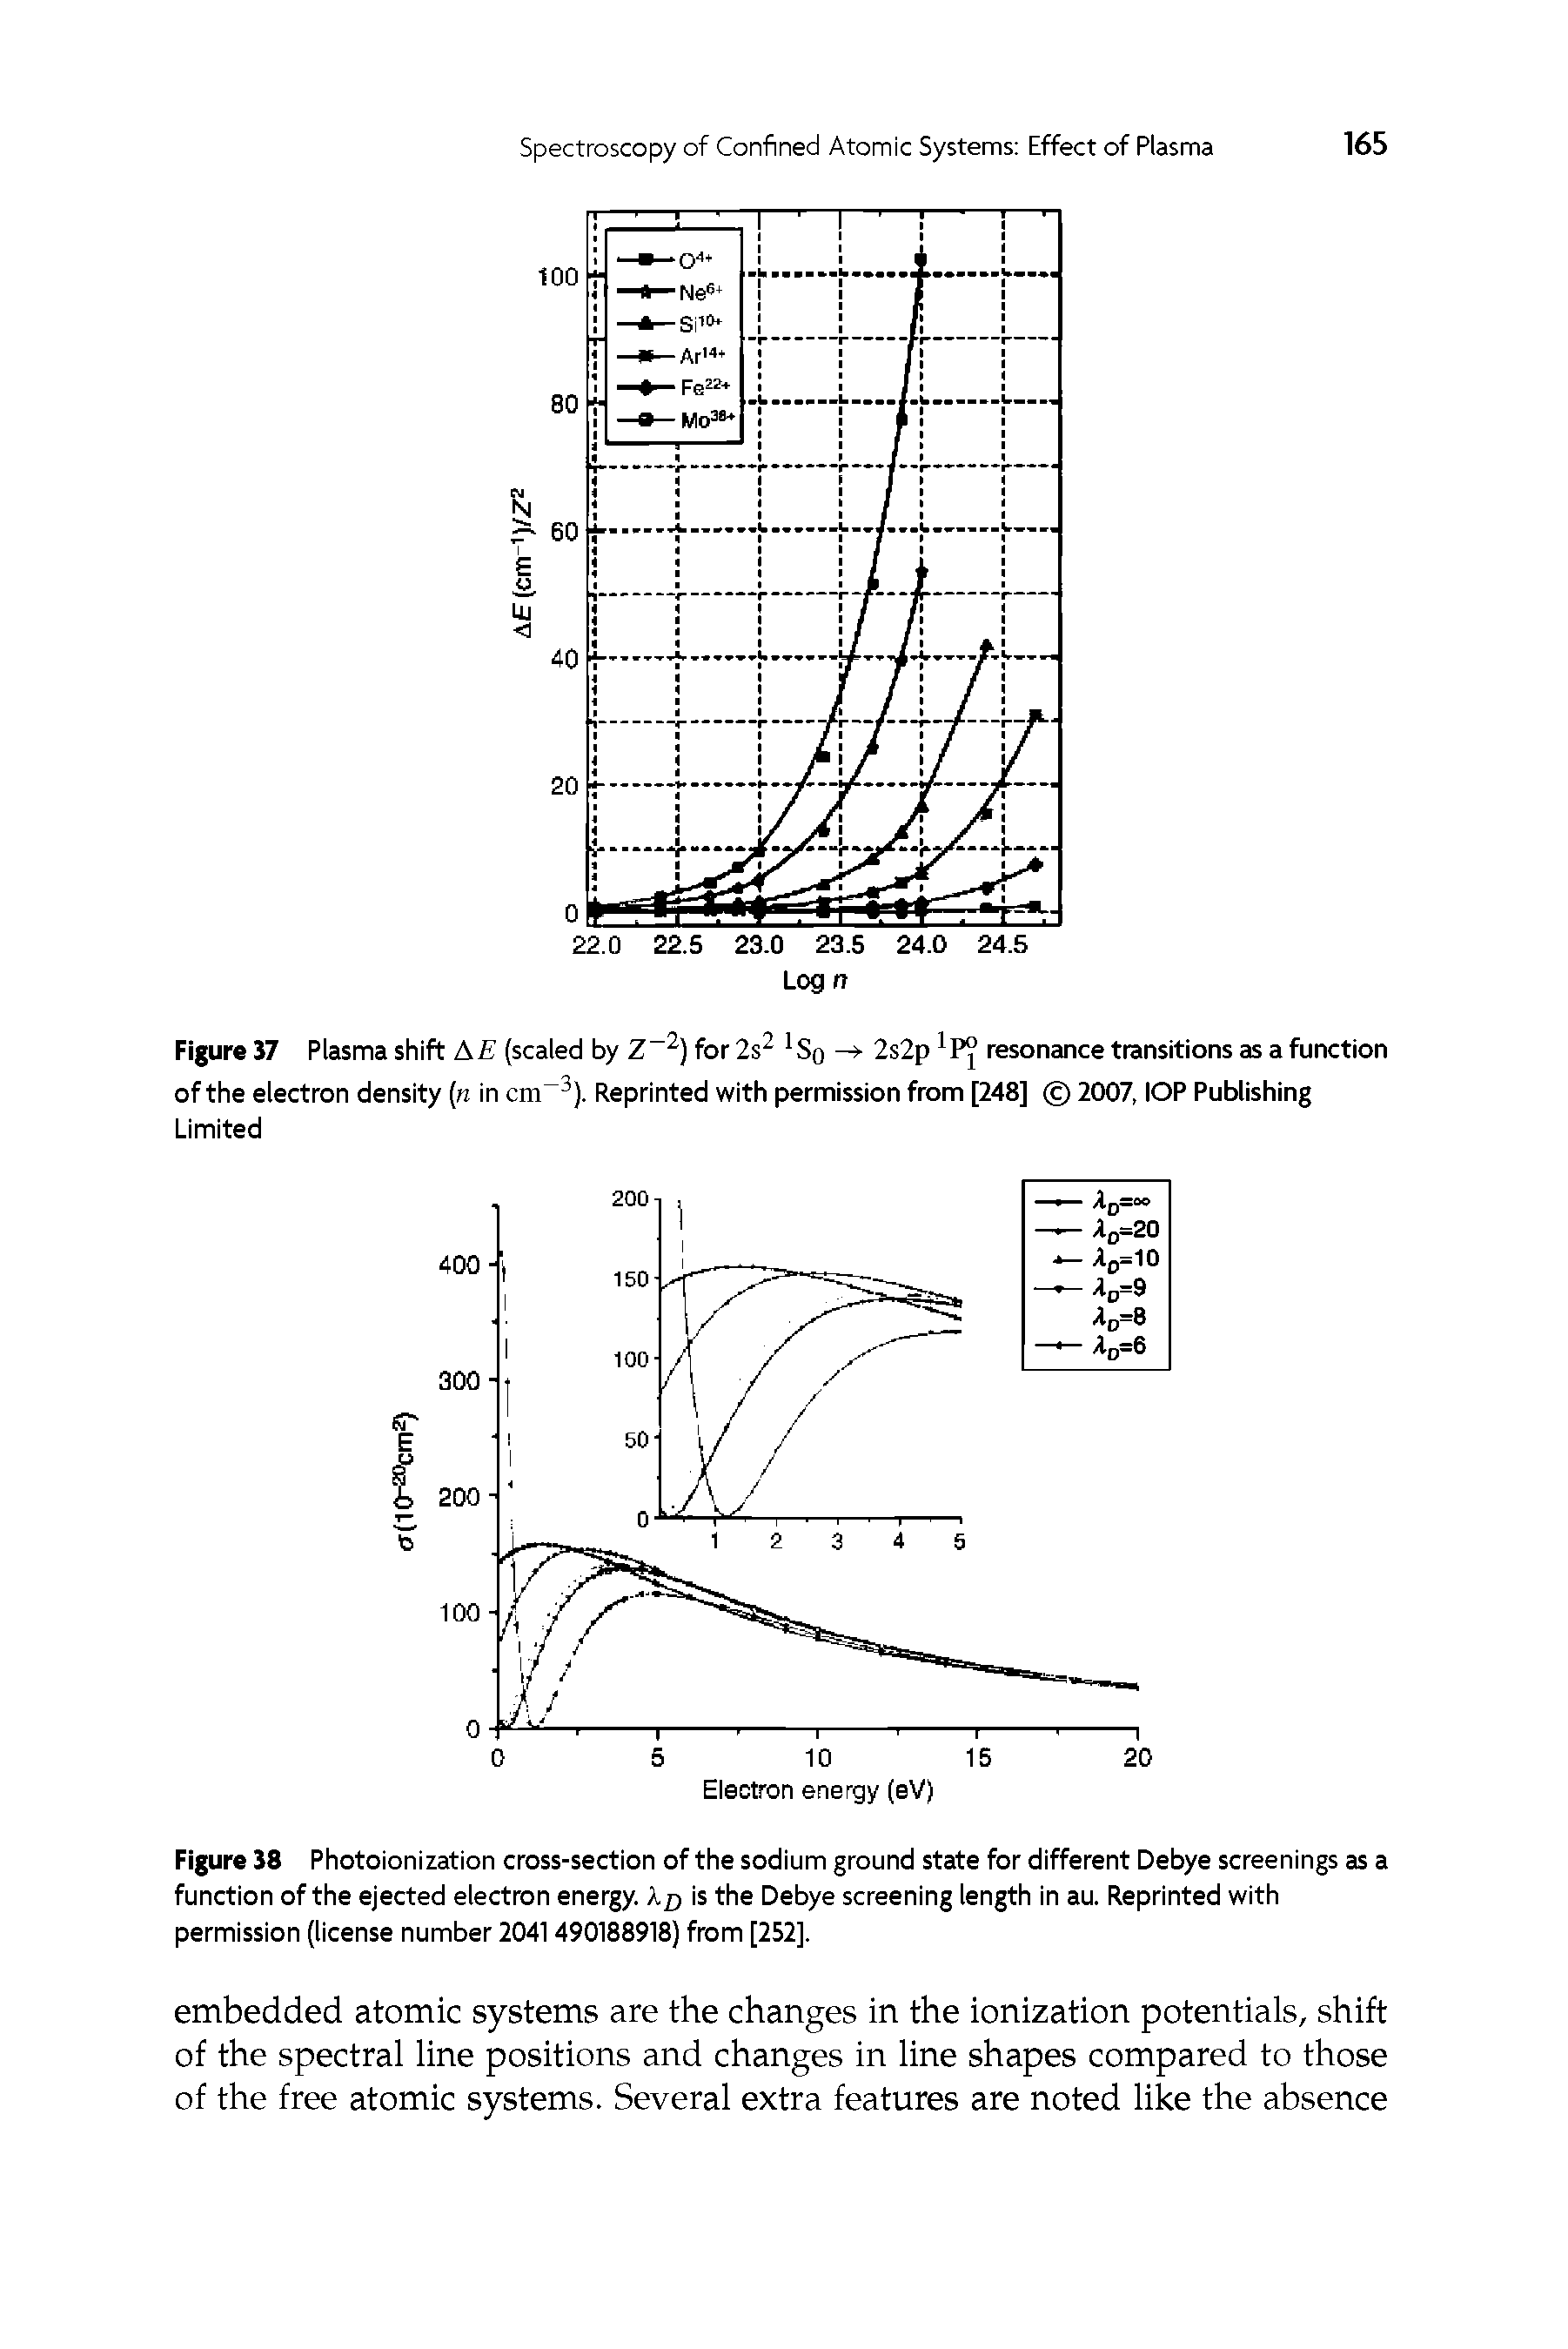 Figure J8 Photoionization cross-section of the sodium ground state for different Debye screenings as a function of the ejected electron energy. Xp is the Debye screening length in au. Reprinted with permission (license number 2041490188918) from [252].